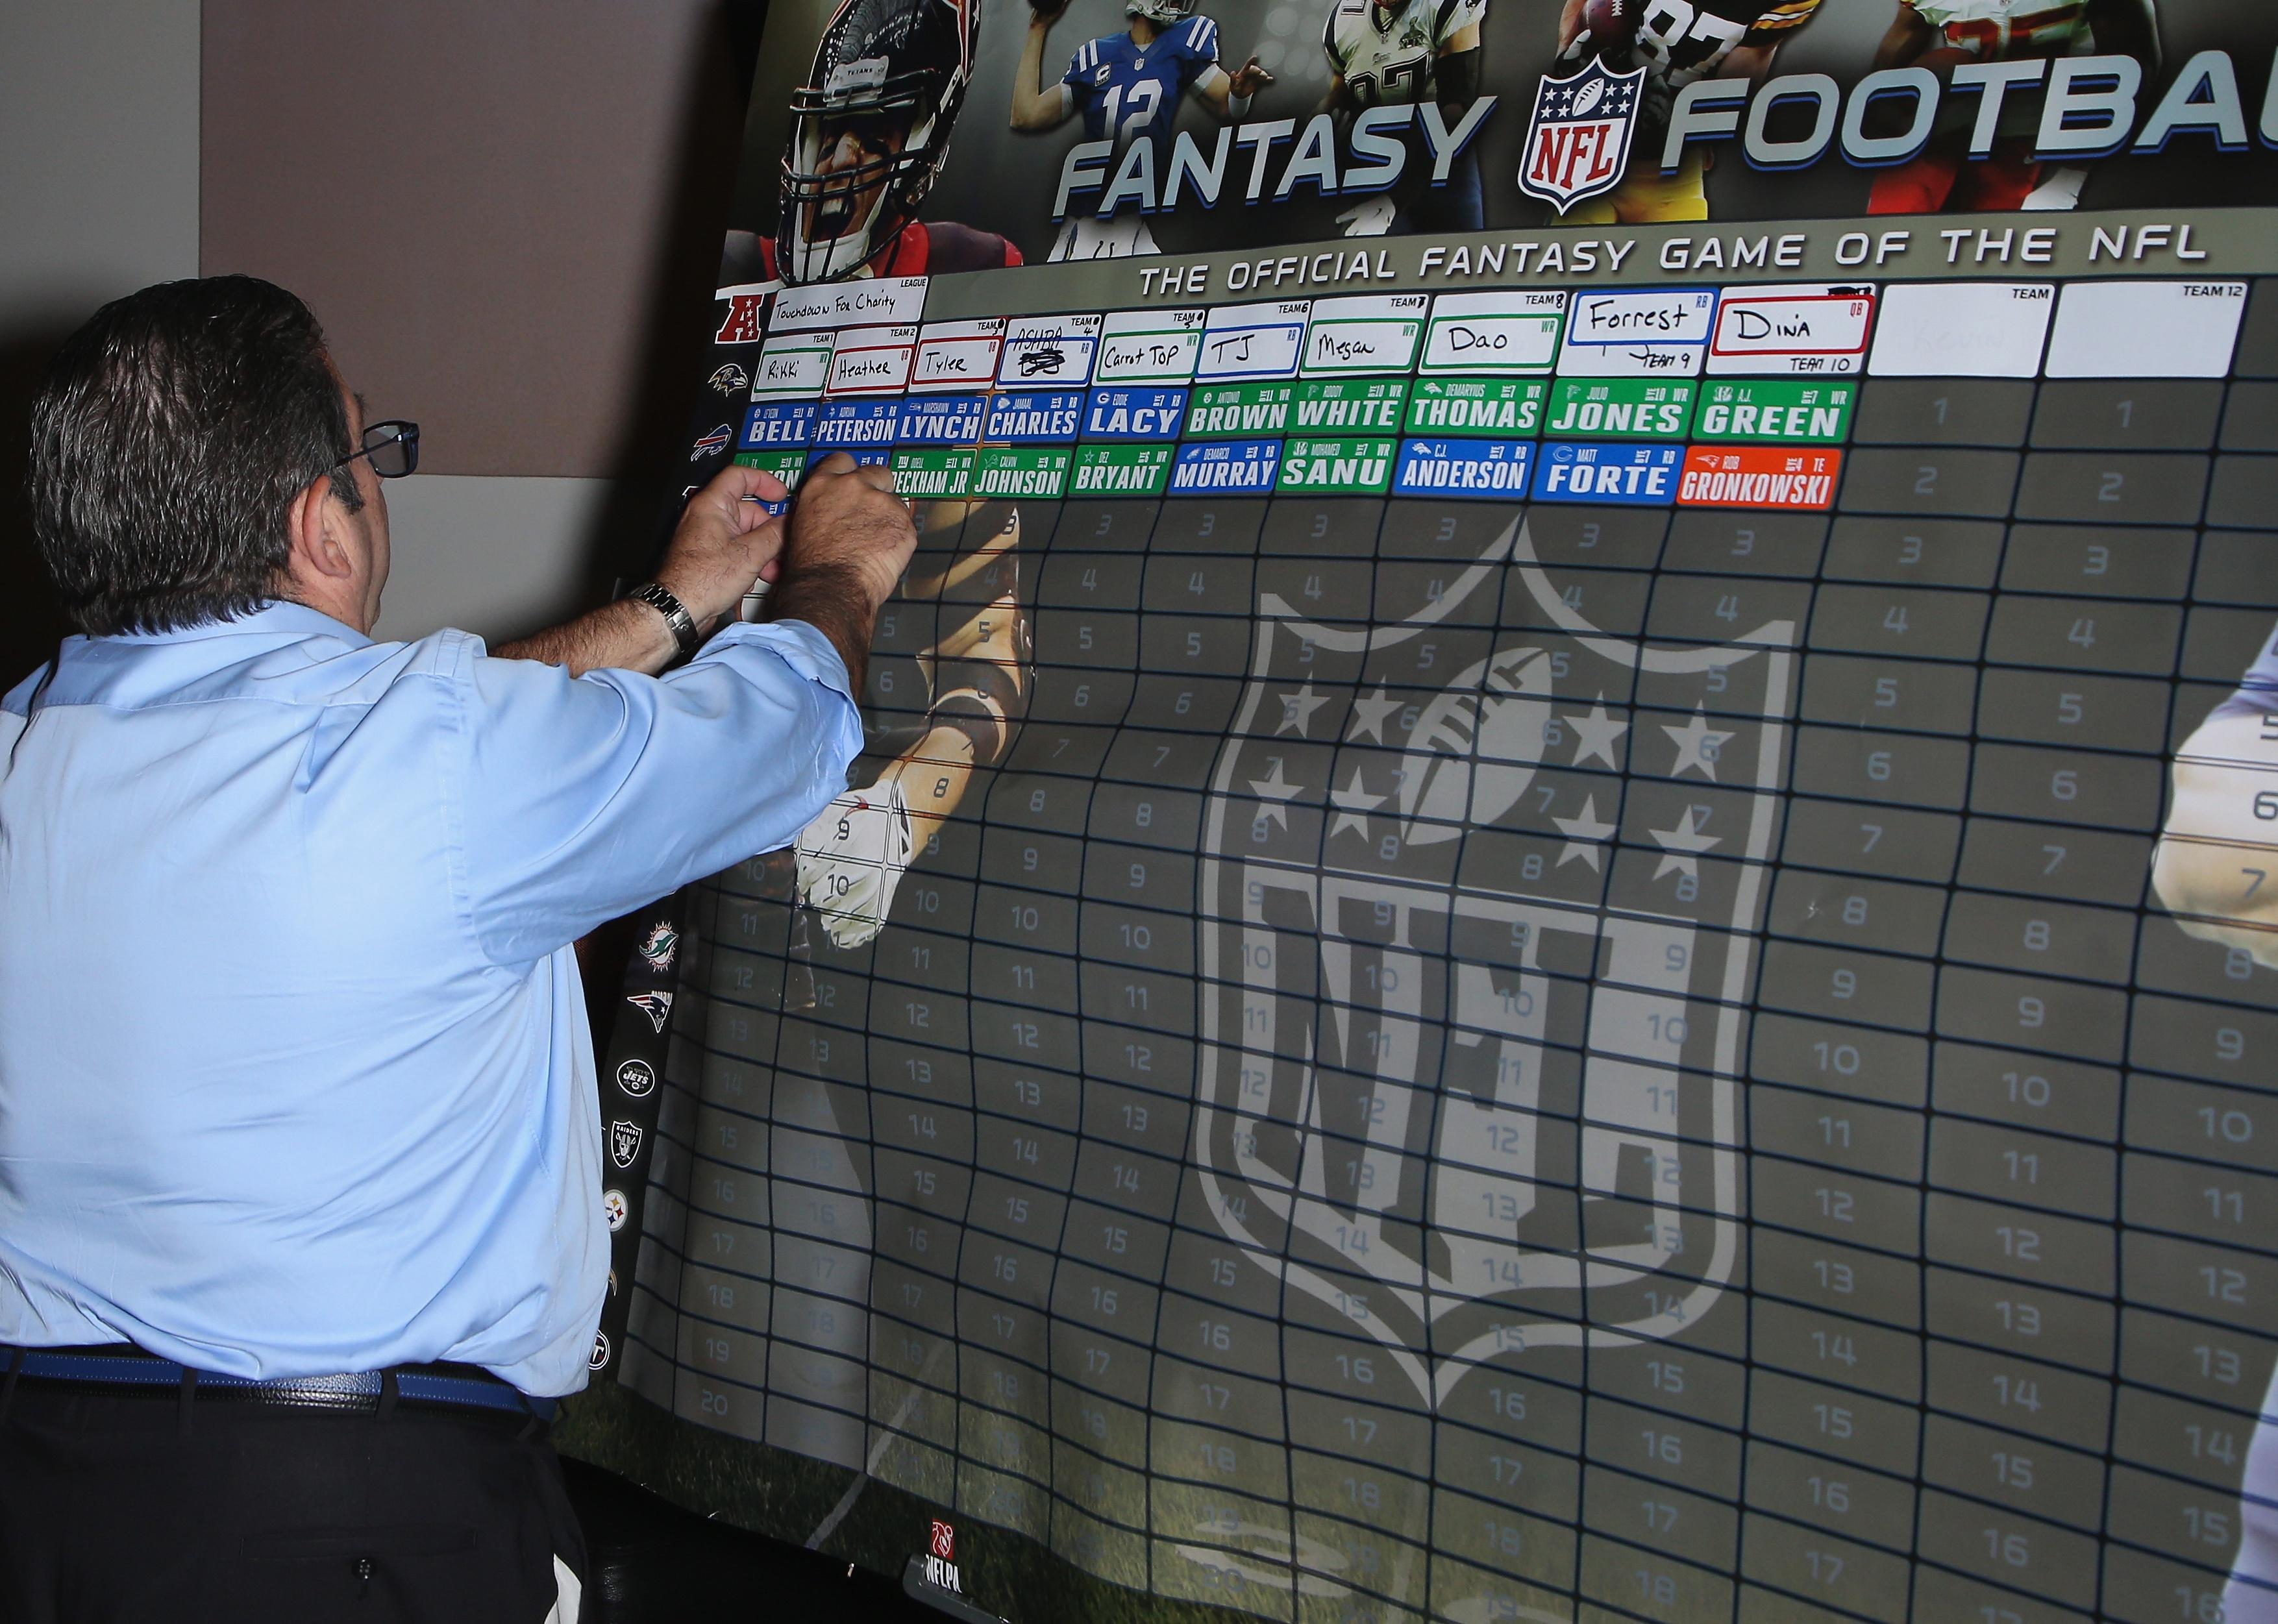 Touchdown for Charity's celebrity fantasy football draft board.